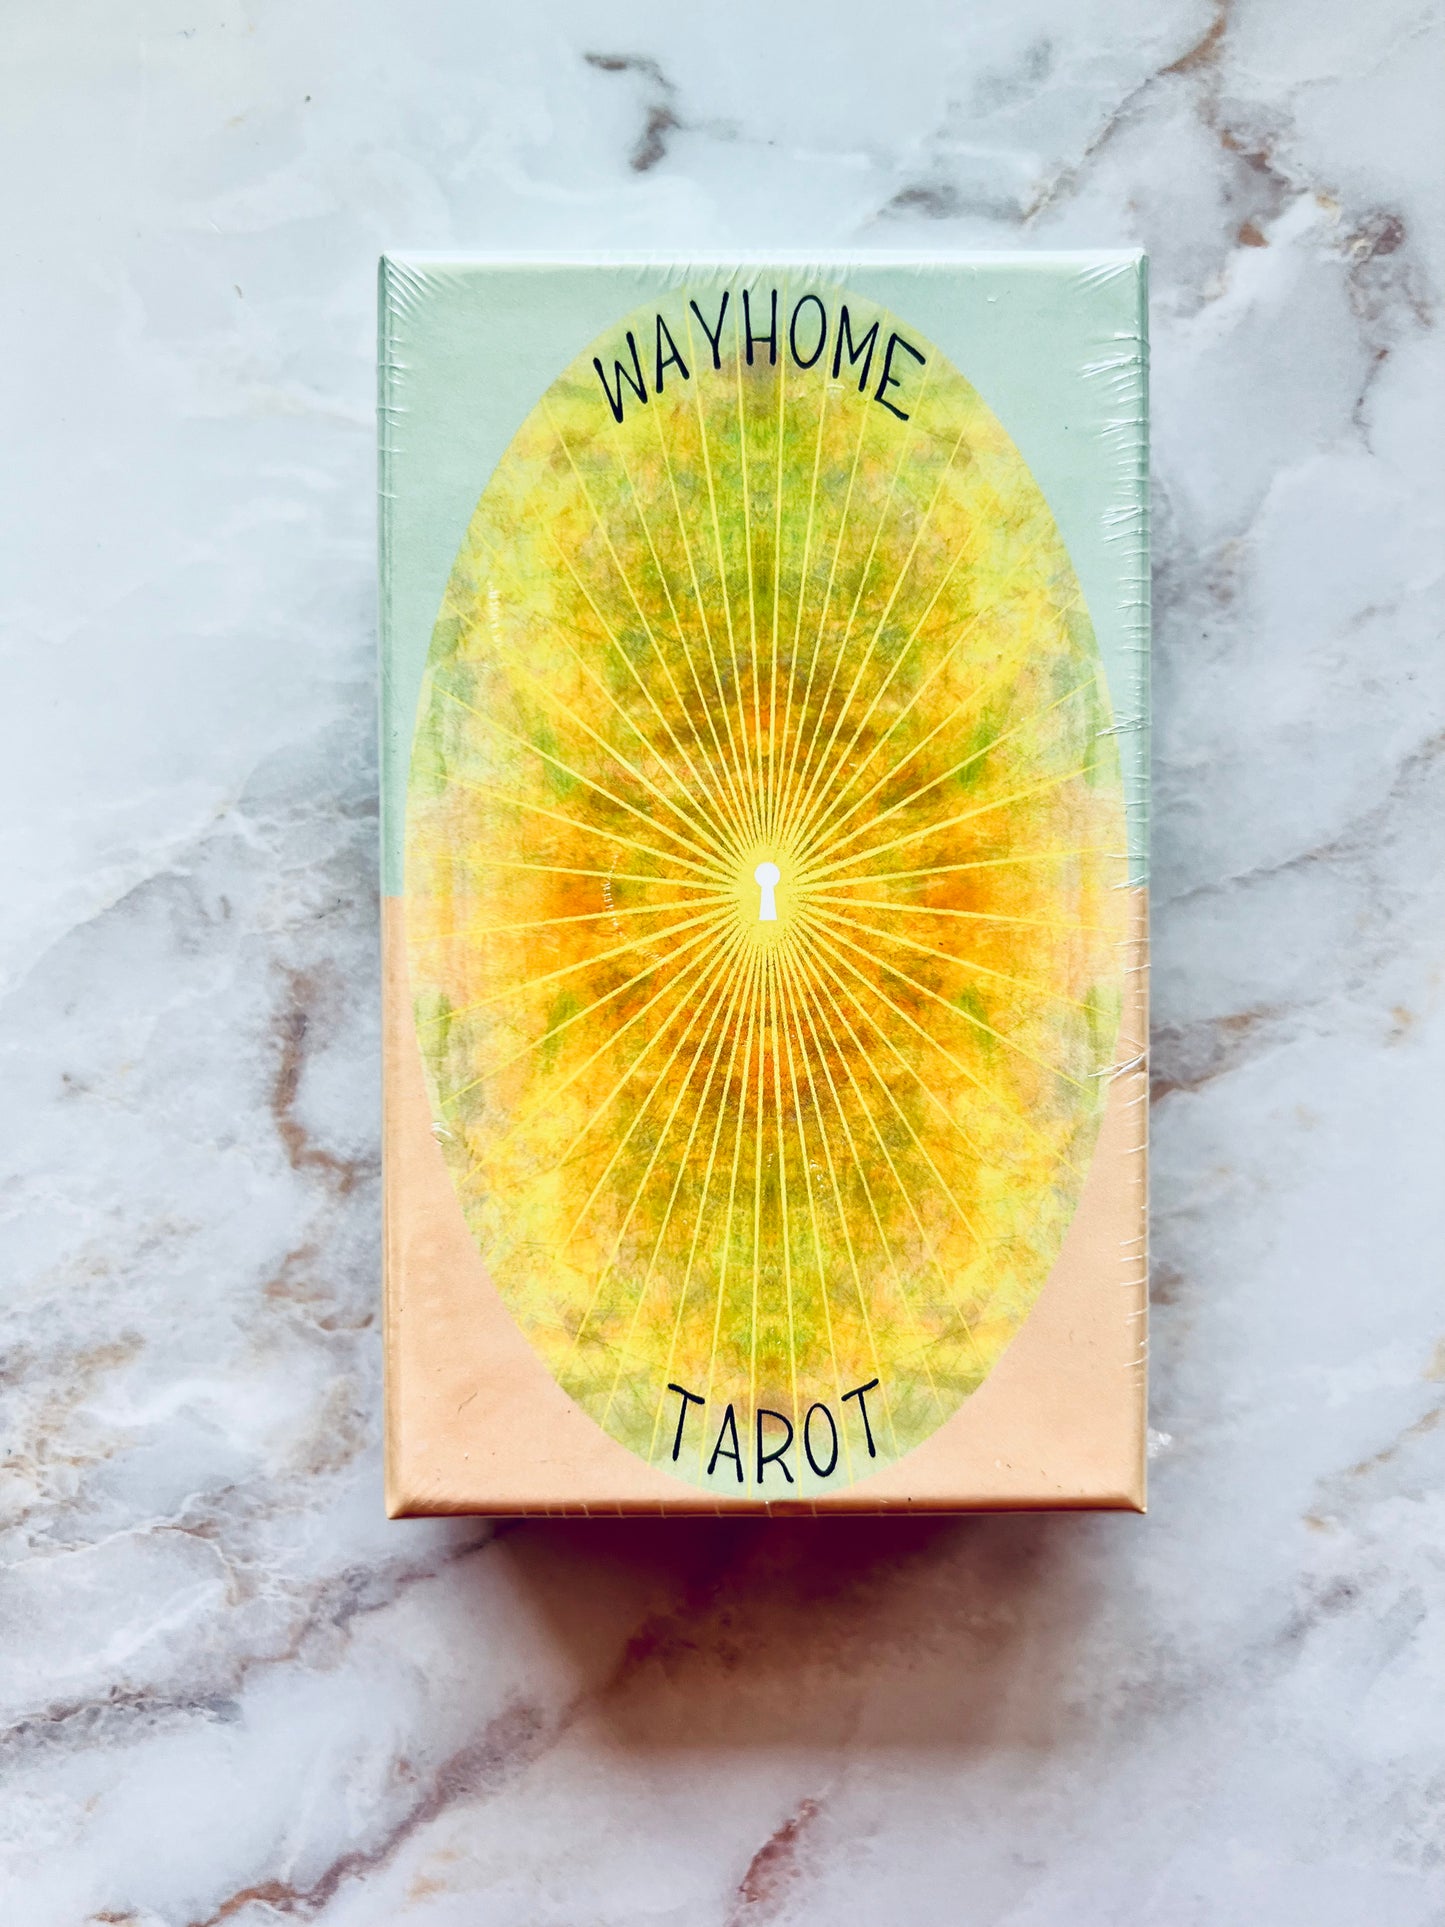 Wayhome Tarot Deck & Visions in the Liminal Space Oracle Deck Bundle